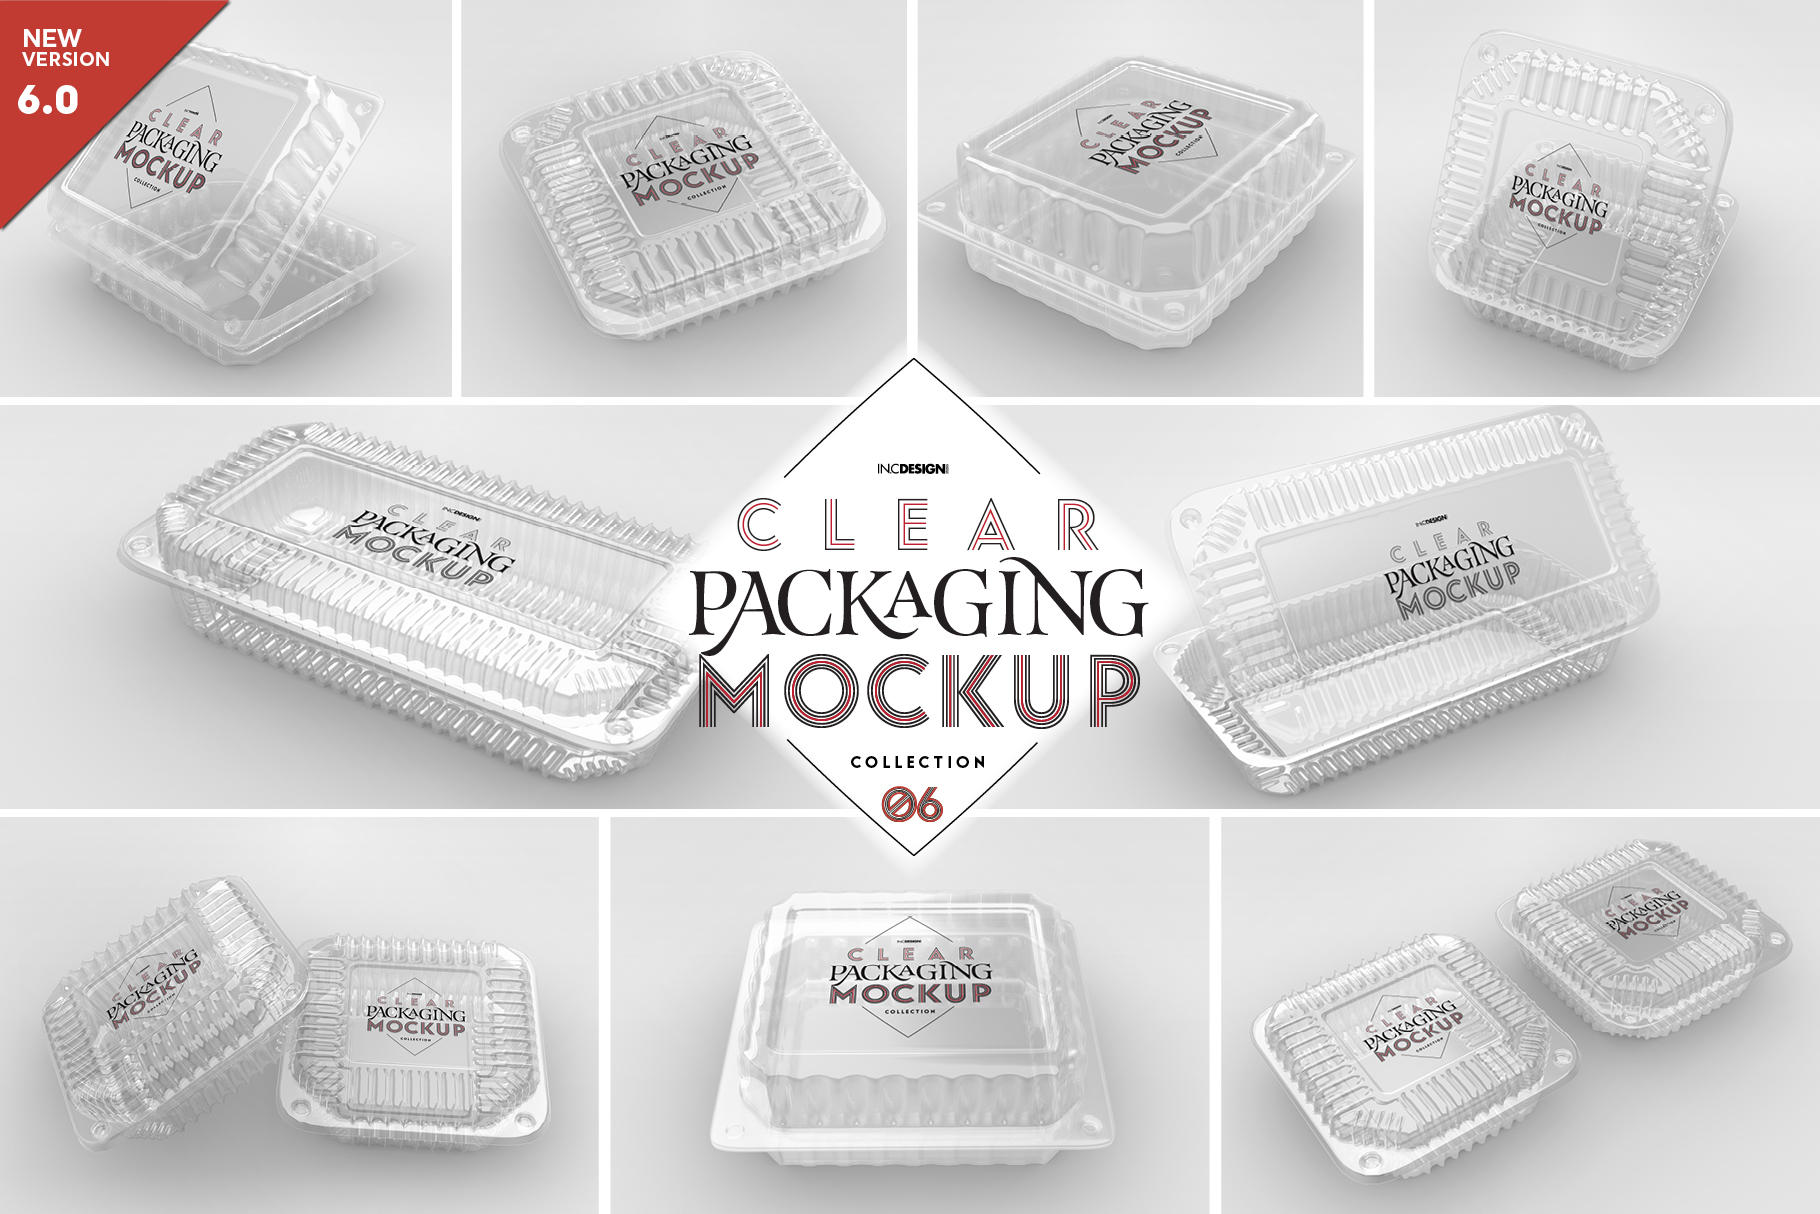 Download VOL.6 Clear Packaging Mockup Collection